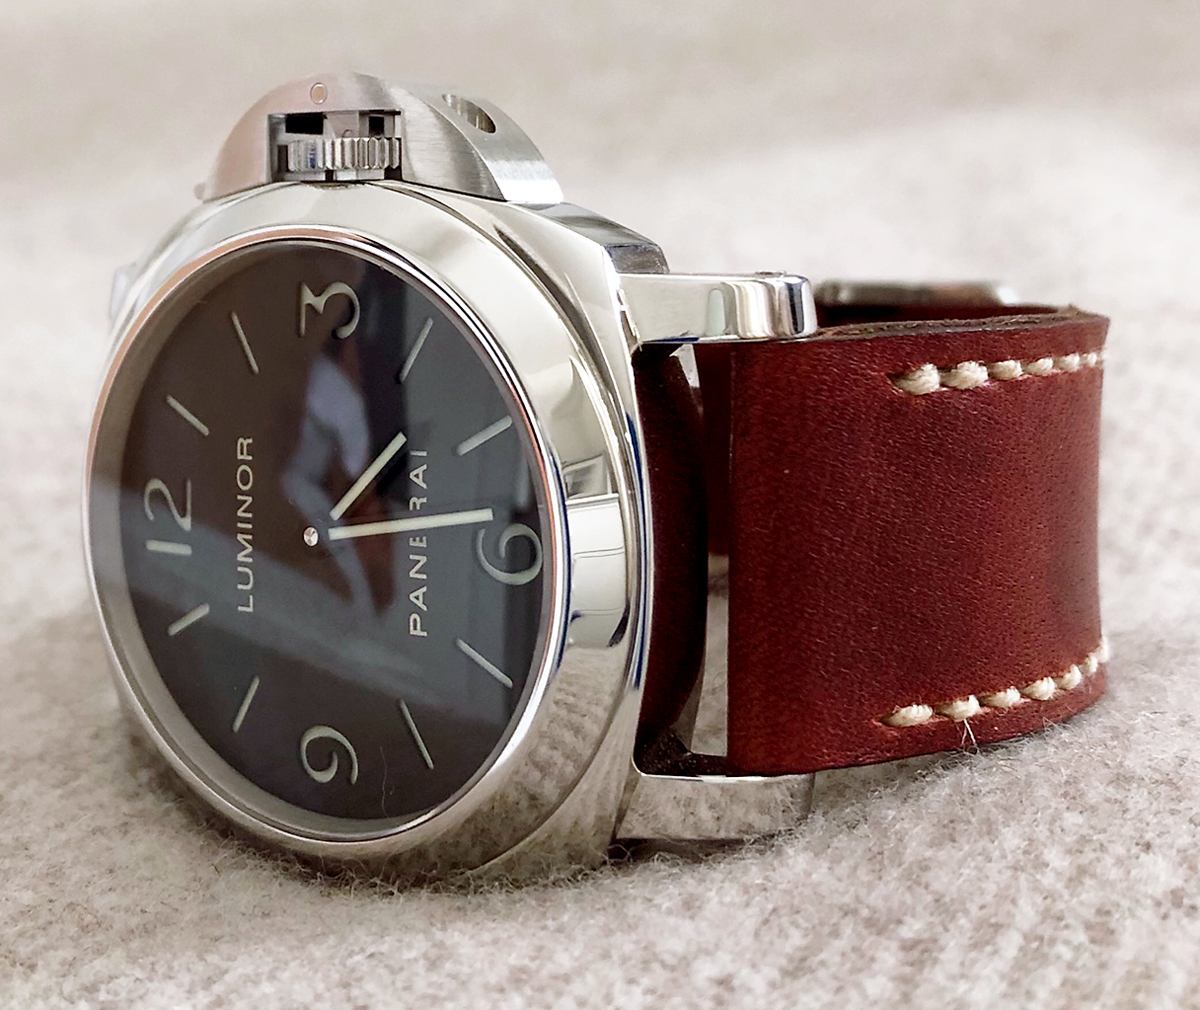 Panerai 112 on Autumn Leaf leather with natural stitching. © Benjamin Wilson